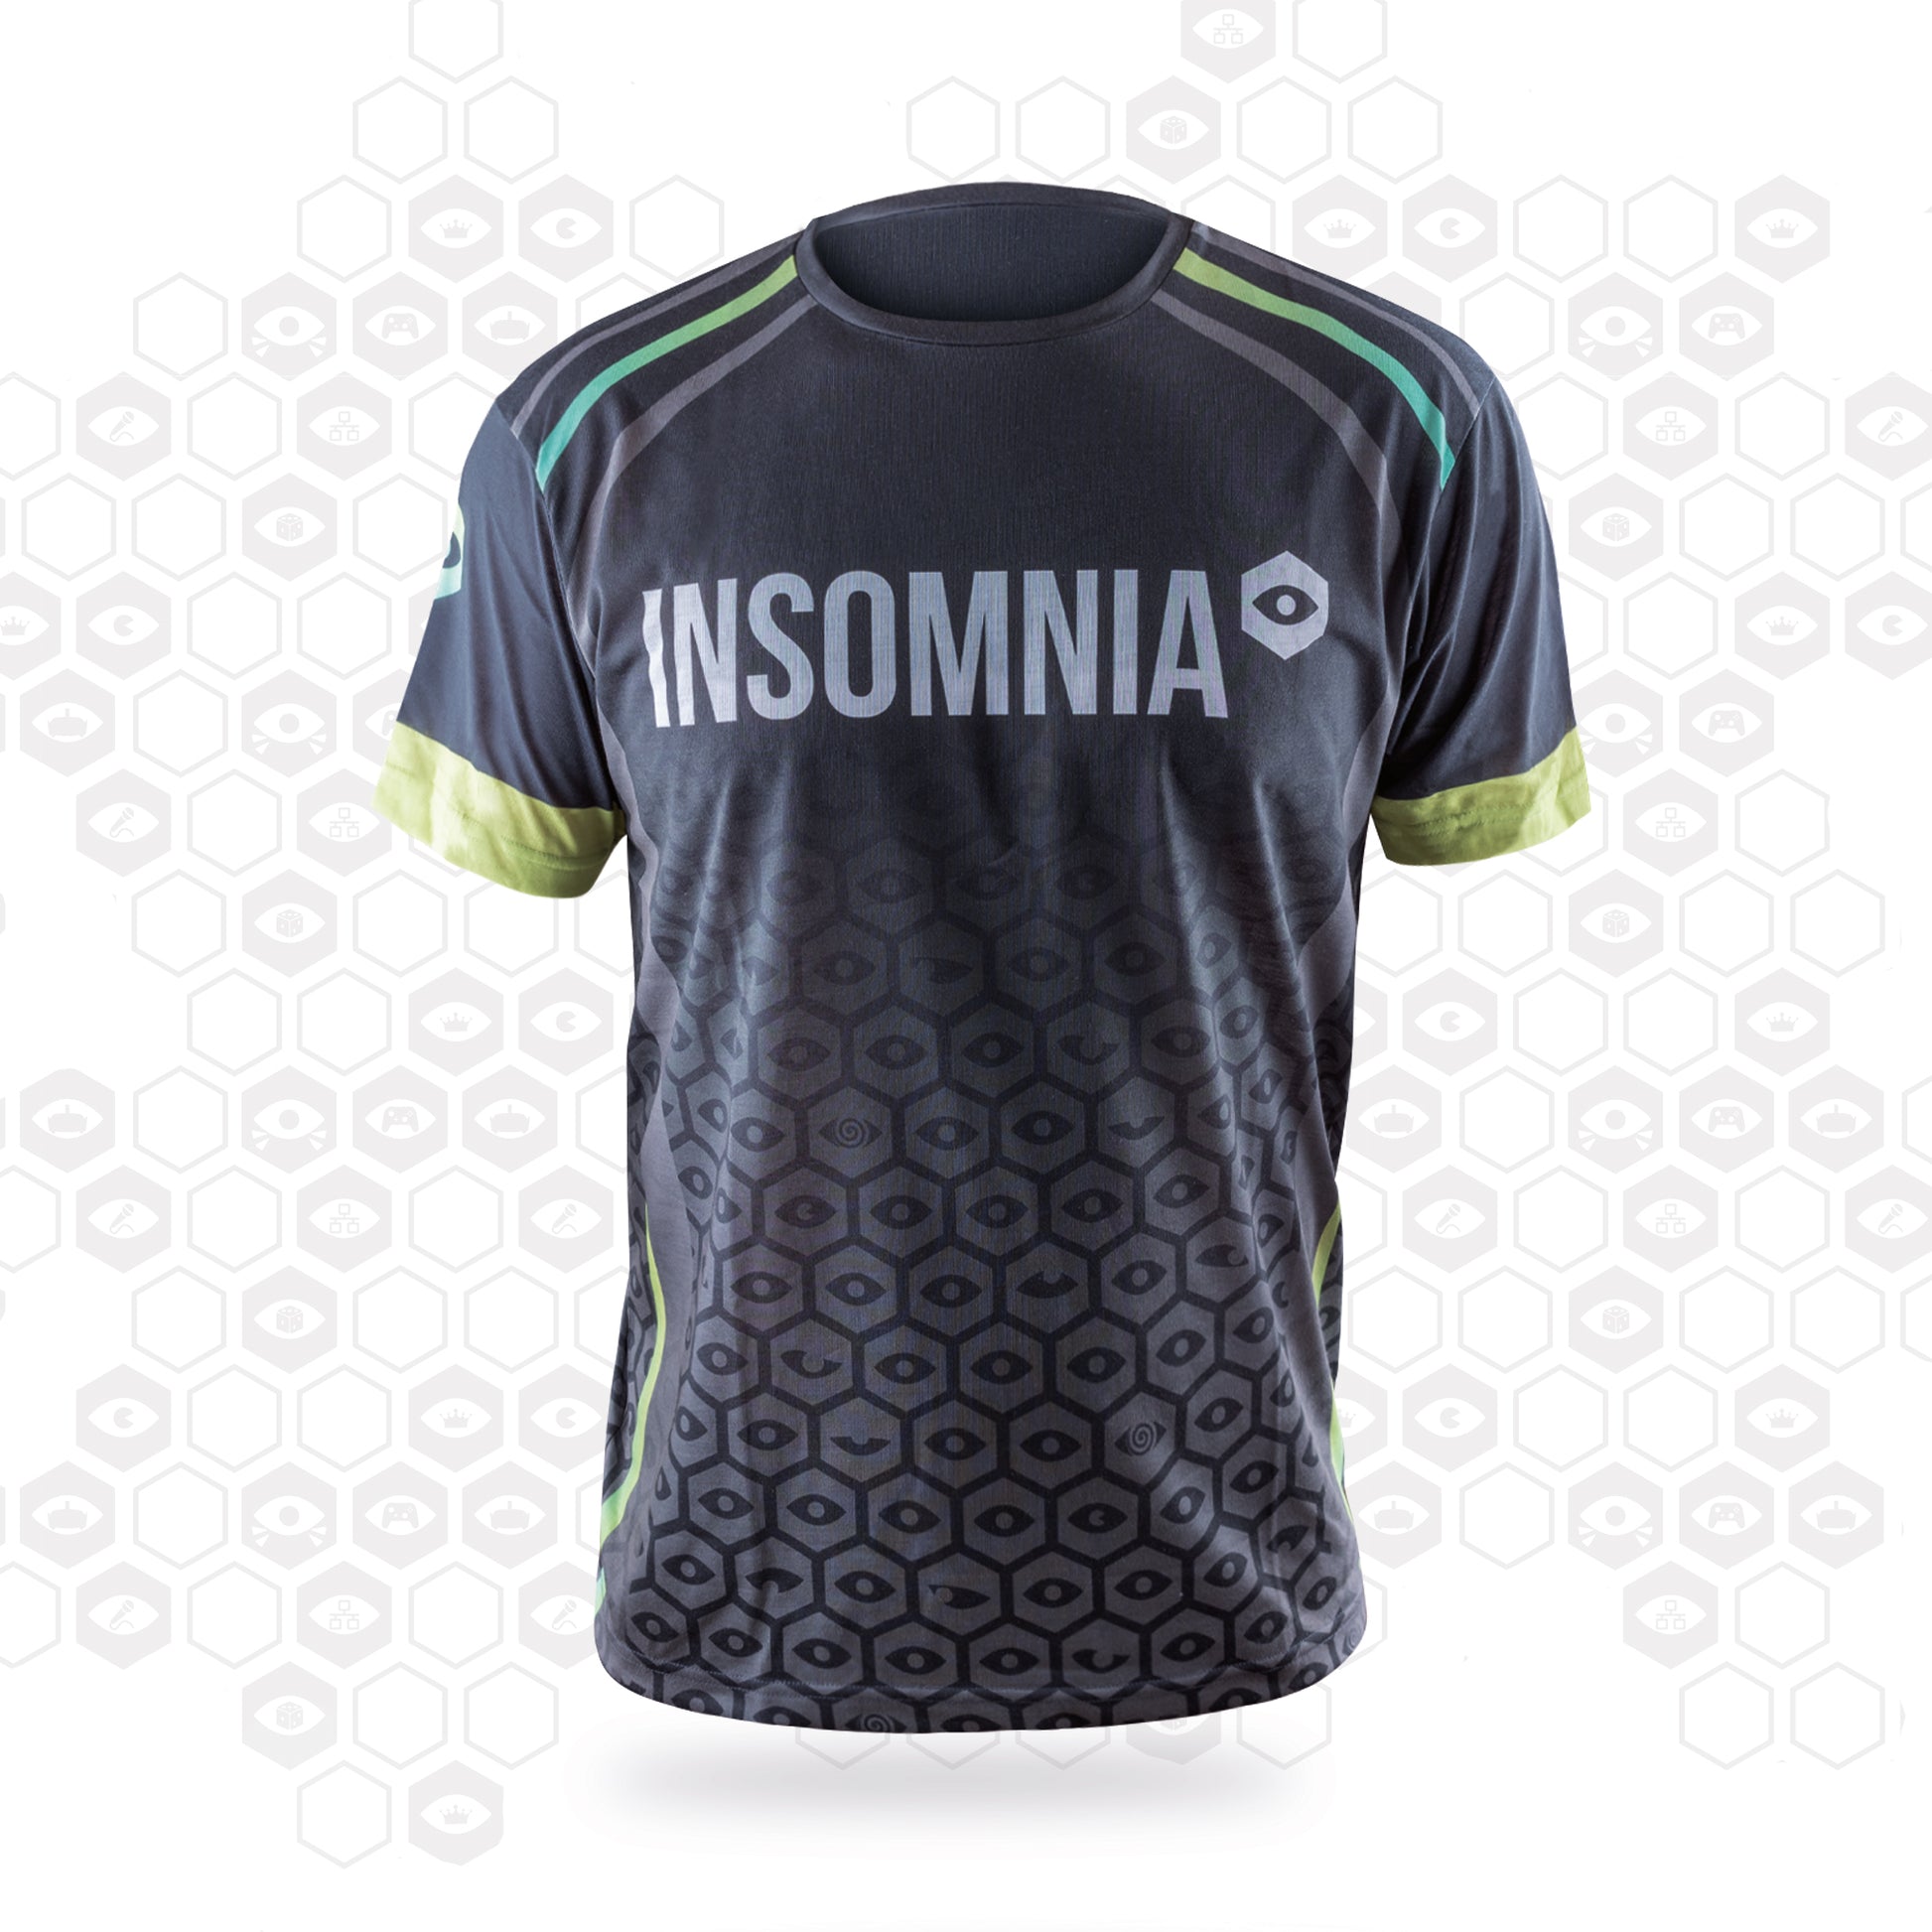 performance t-shirt with insomnia logo across the chest. Tone on tone insomnia eye motif pattern in the body and green detailing on the sleeves, shoulders, and sides.